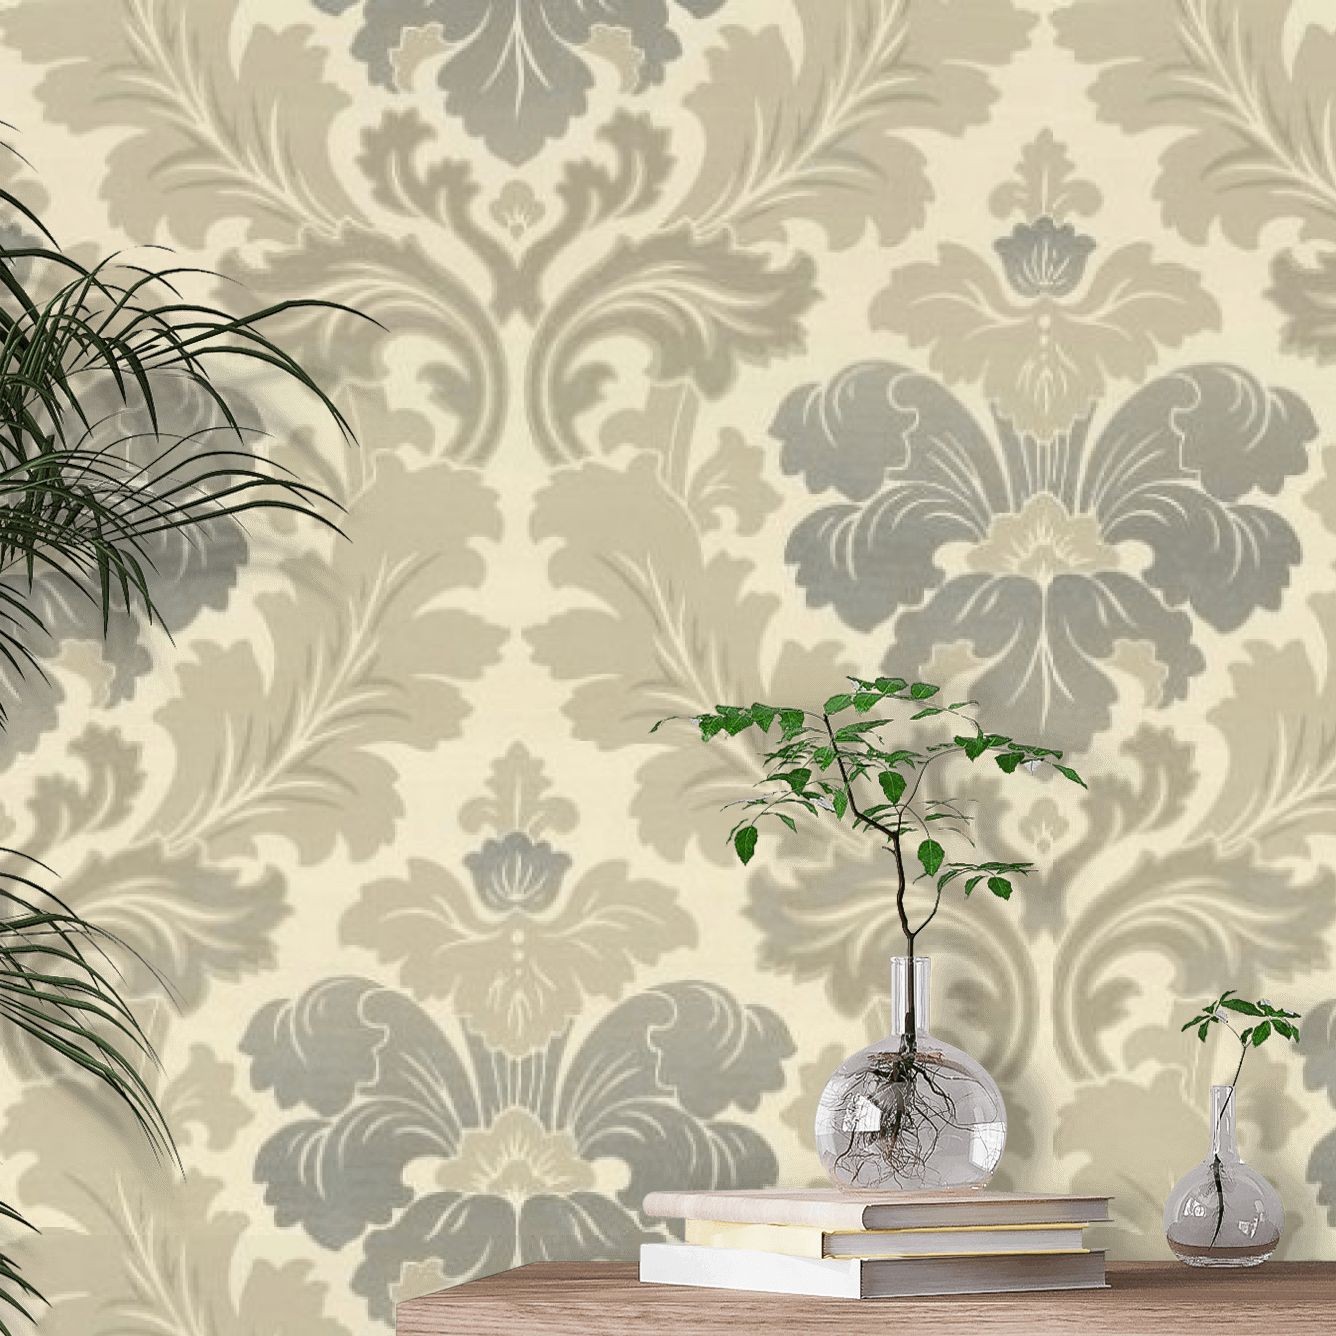 Wrap Your Rooms in These Botanical Wallcoverings - Flower Magazine